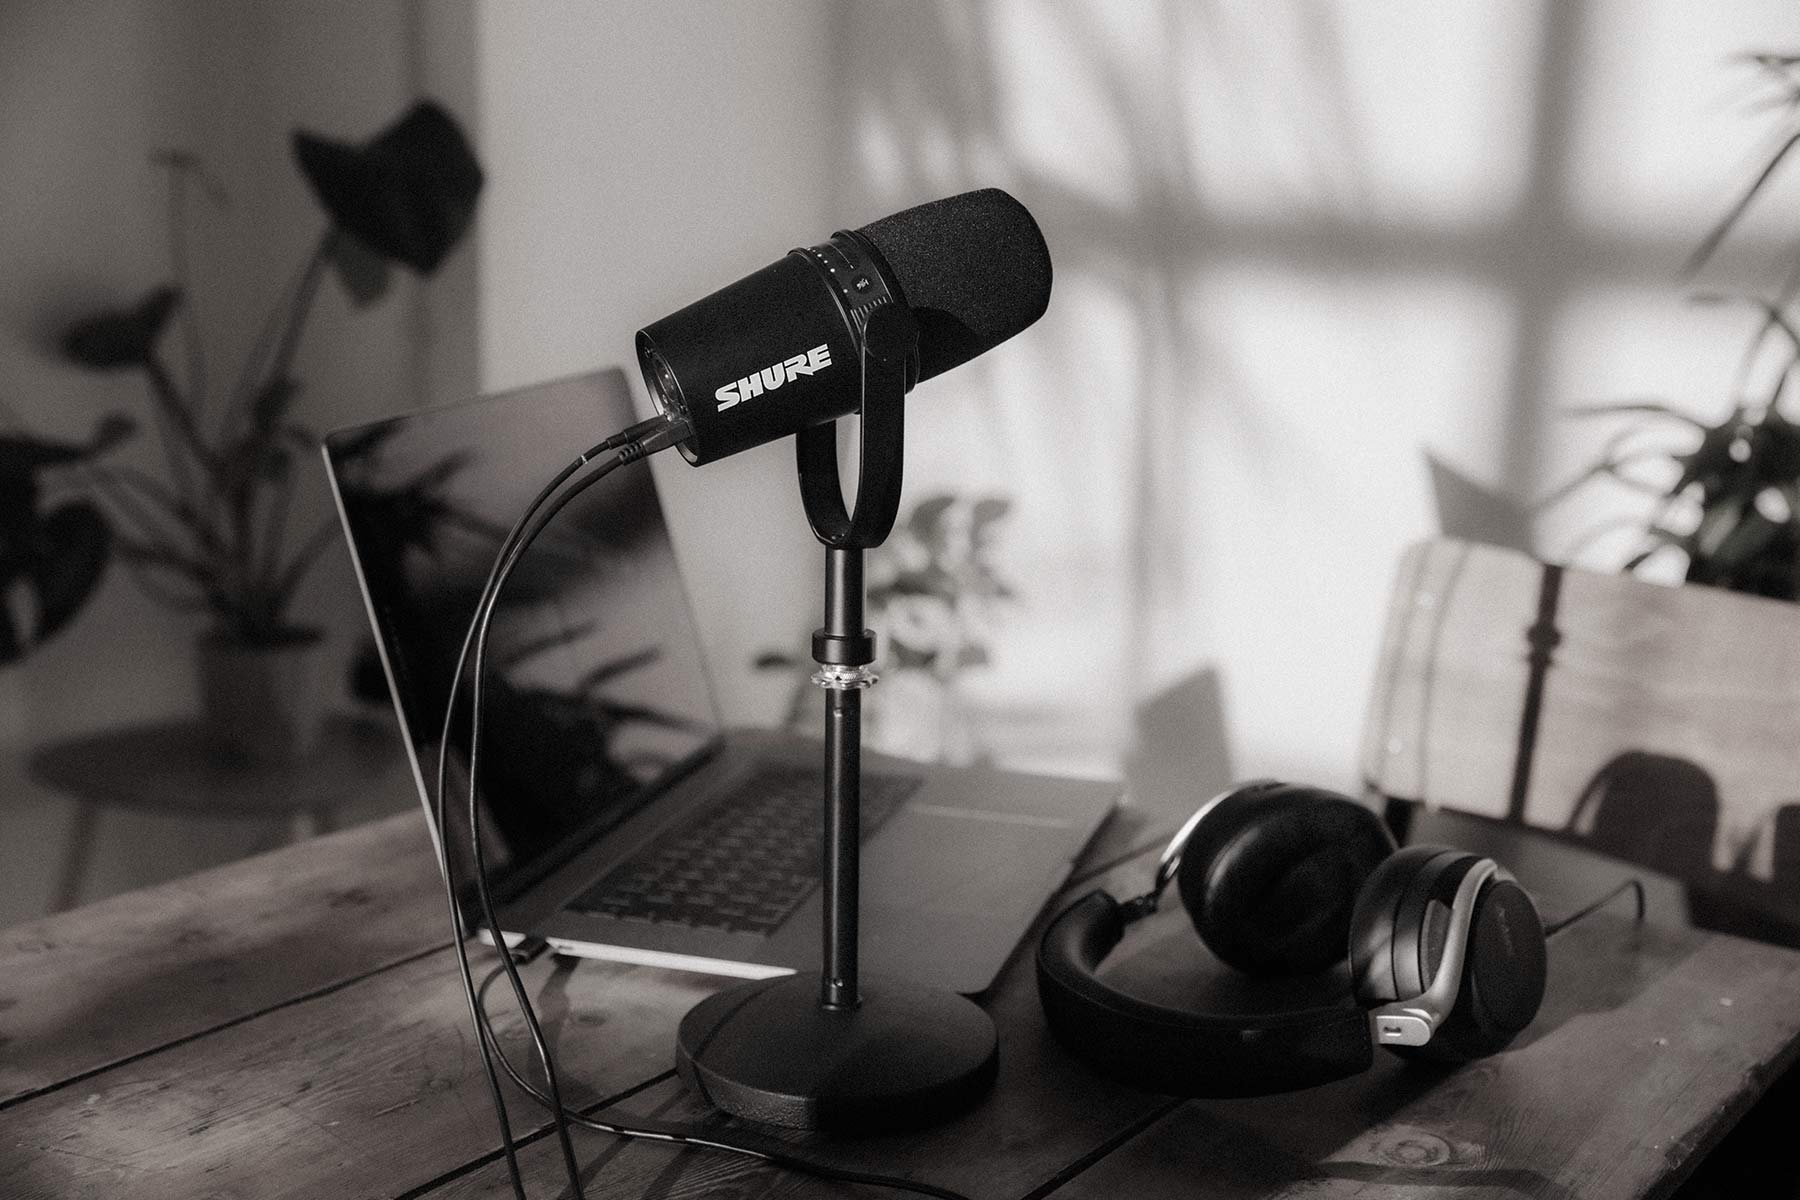 Shure MV7 vs SM7B: which mic is right for you?